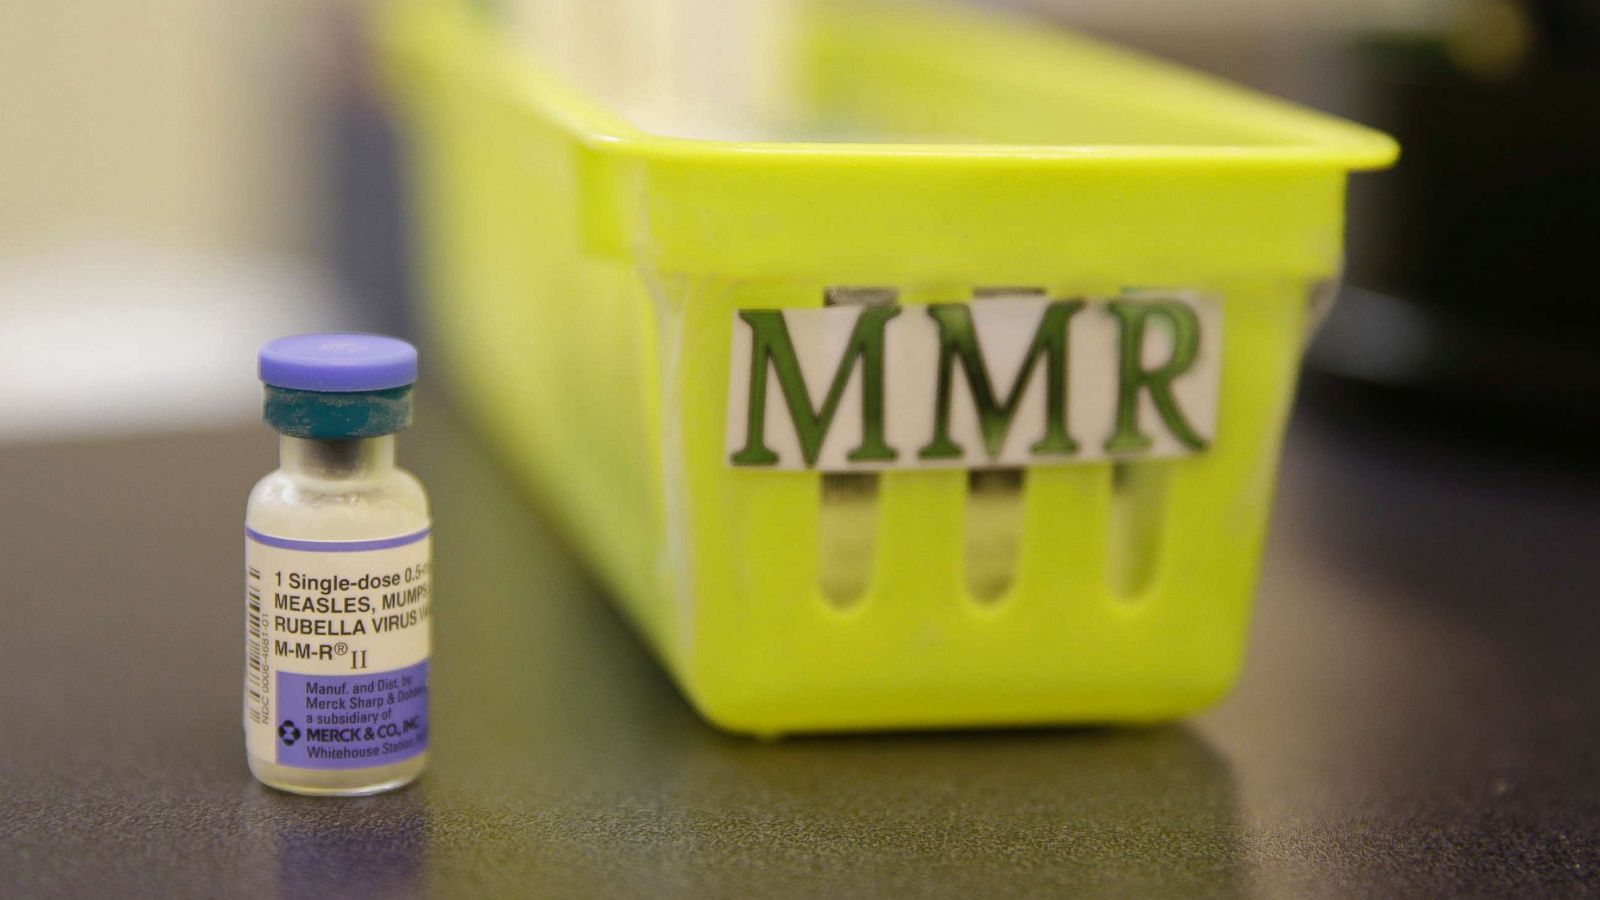 Mmr vaccine meaning